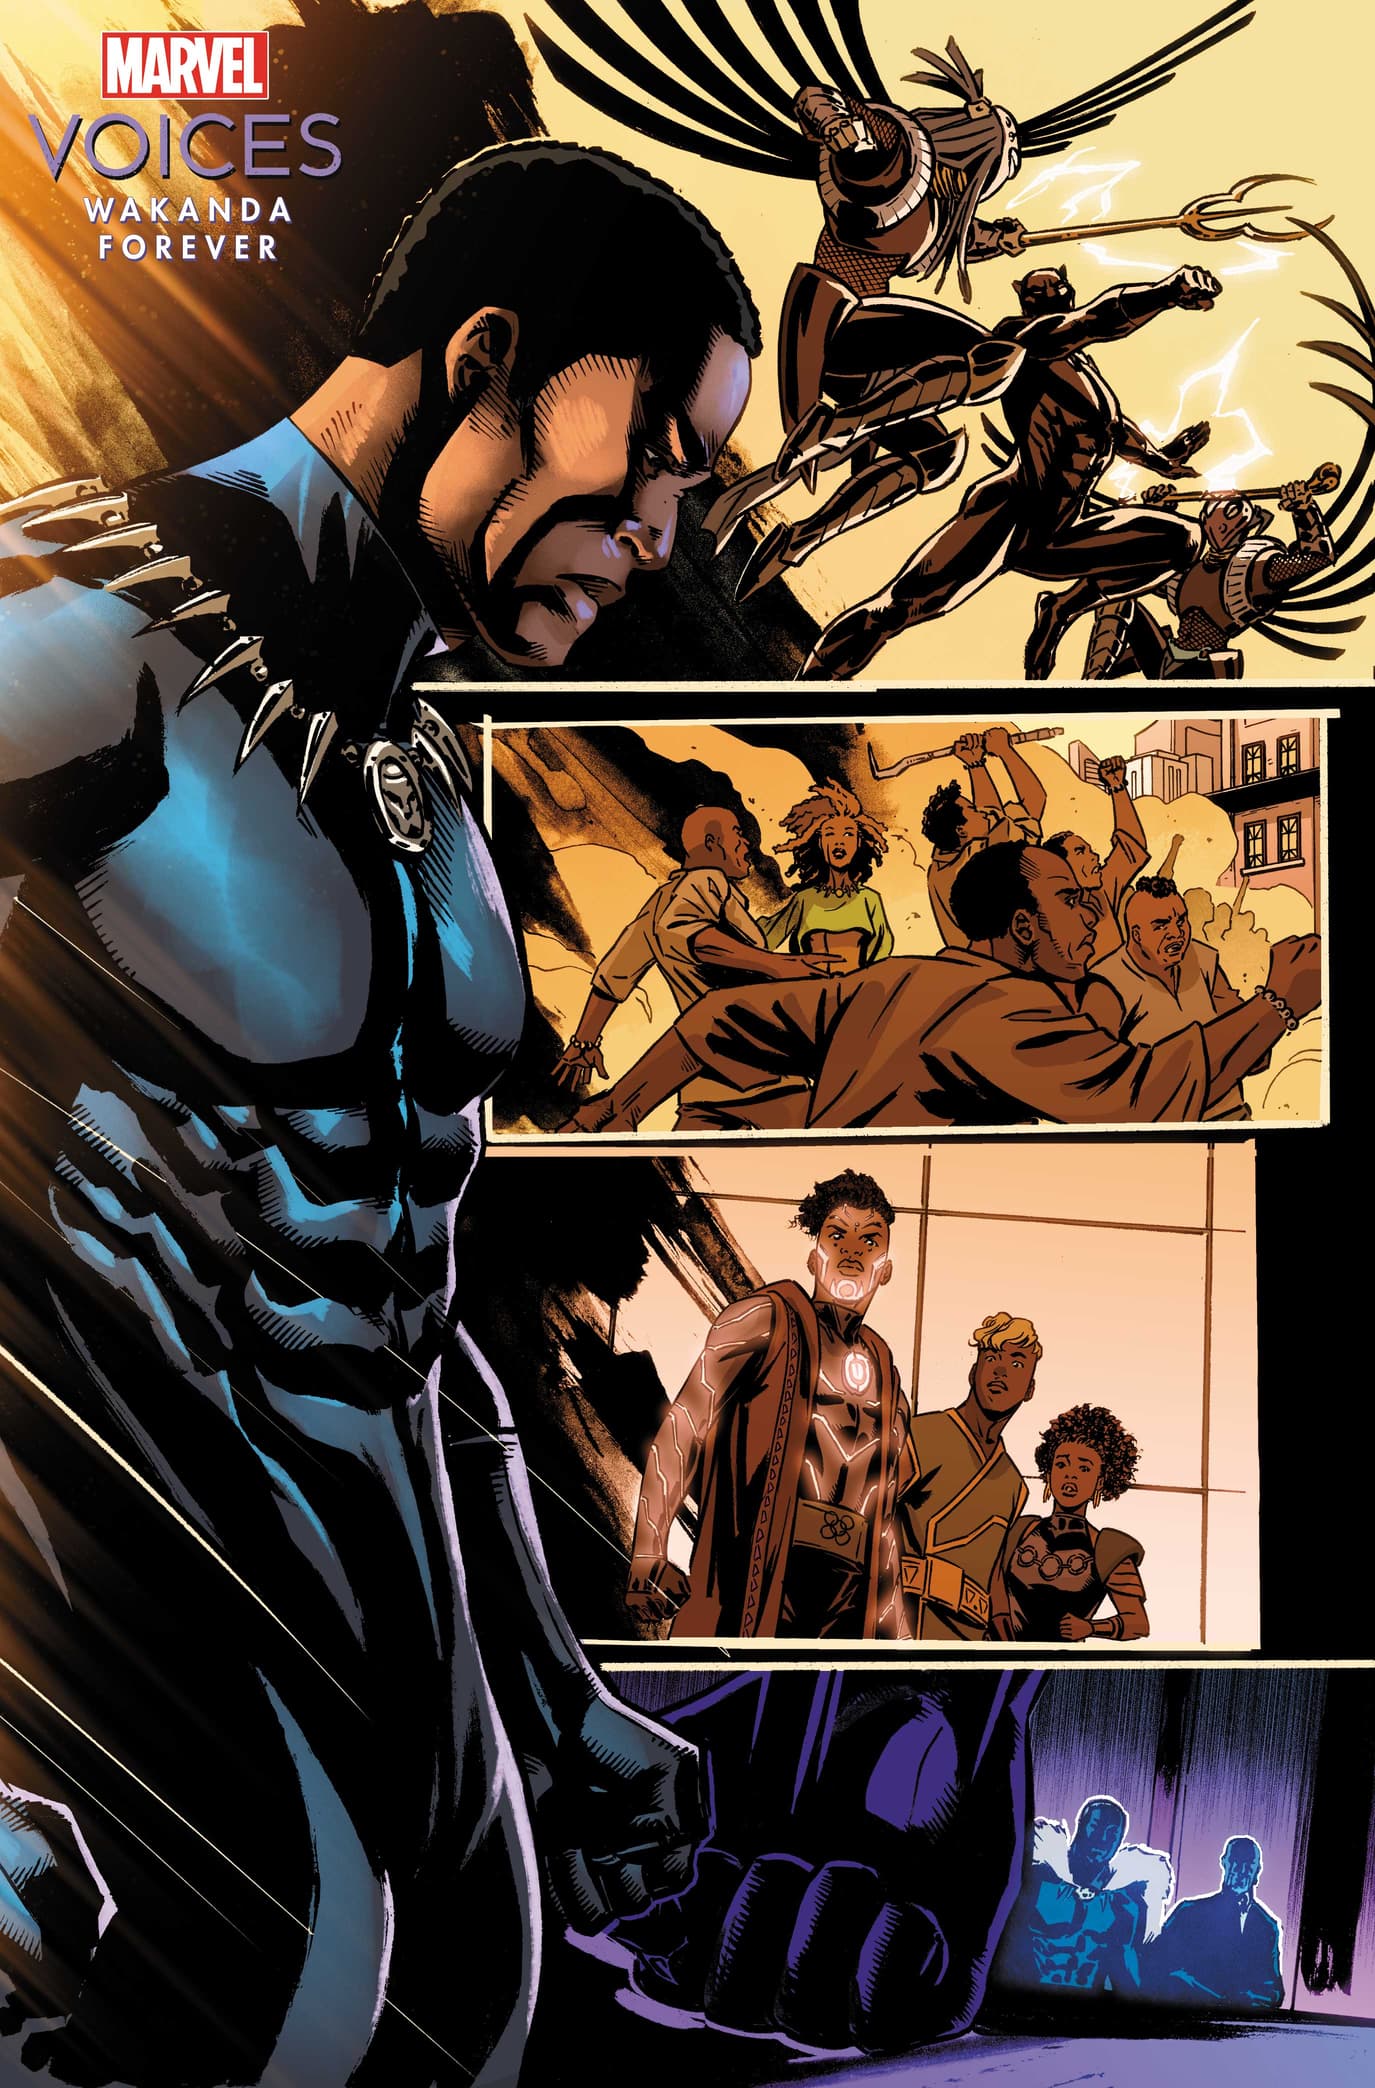 MARVEL’S VOICES: WAKANDA FOREVER #1—“The Old Ways” artwork by Alitha E. Martinez